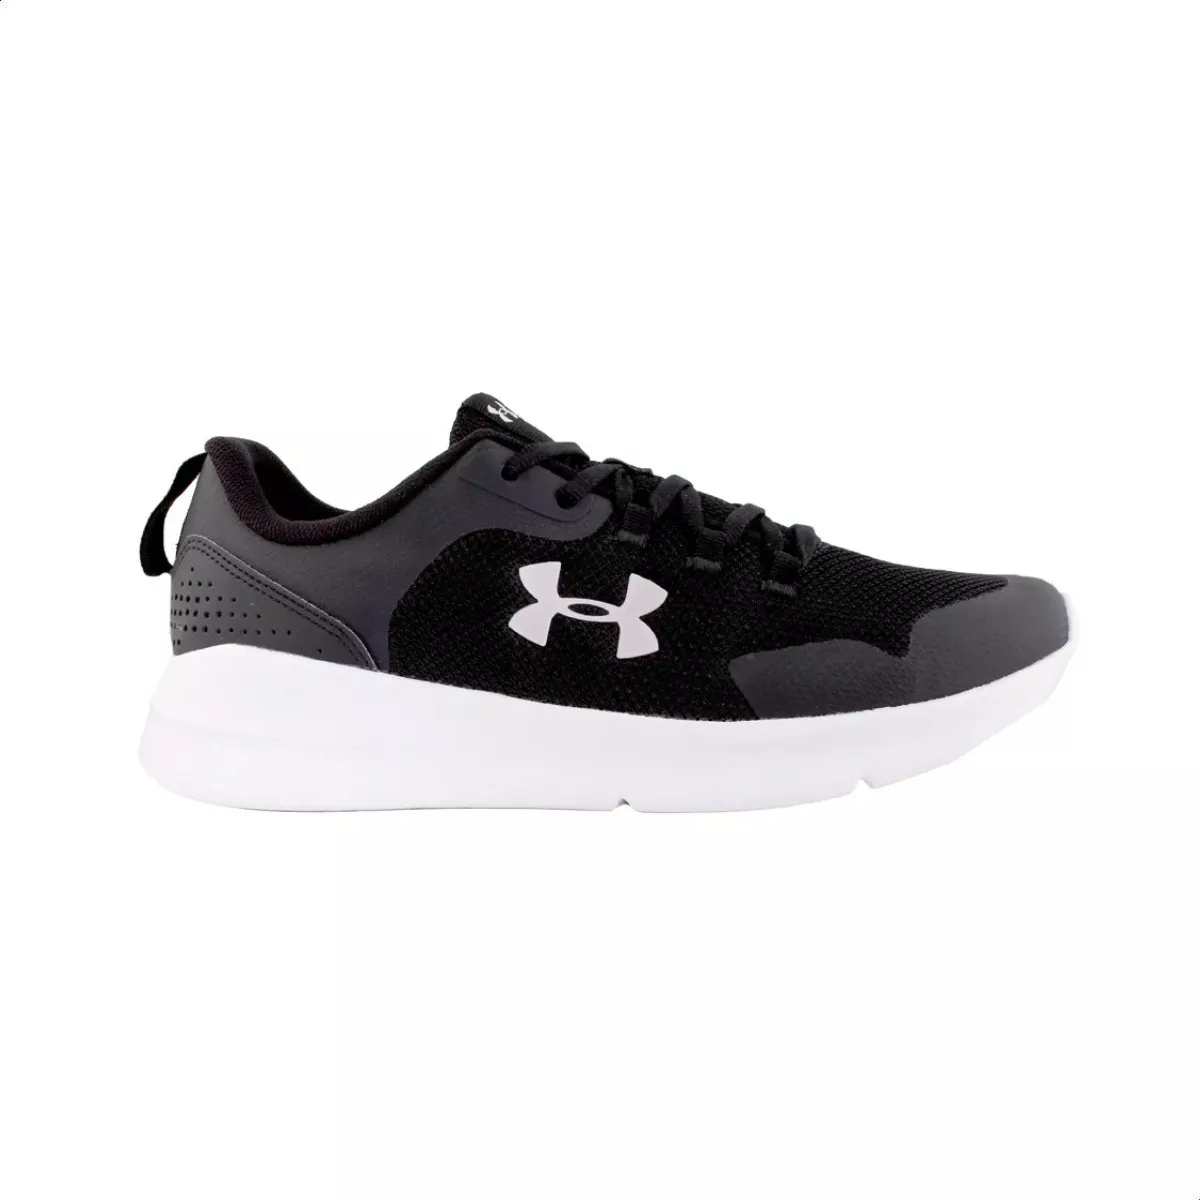 Tenis Para Hombre Under Armour Charged Essential Color Negro - Adulto 8.5 Mx